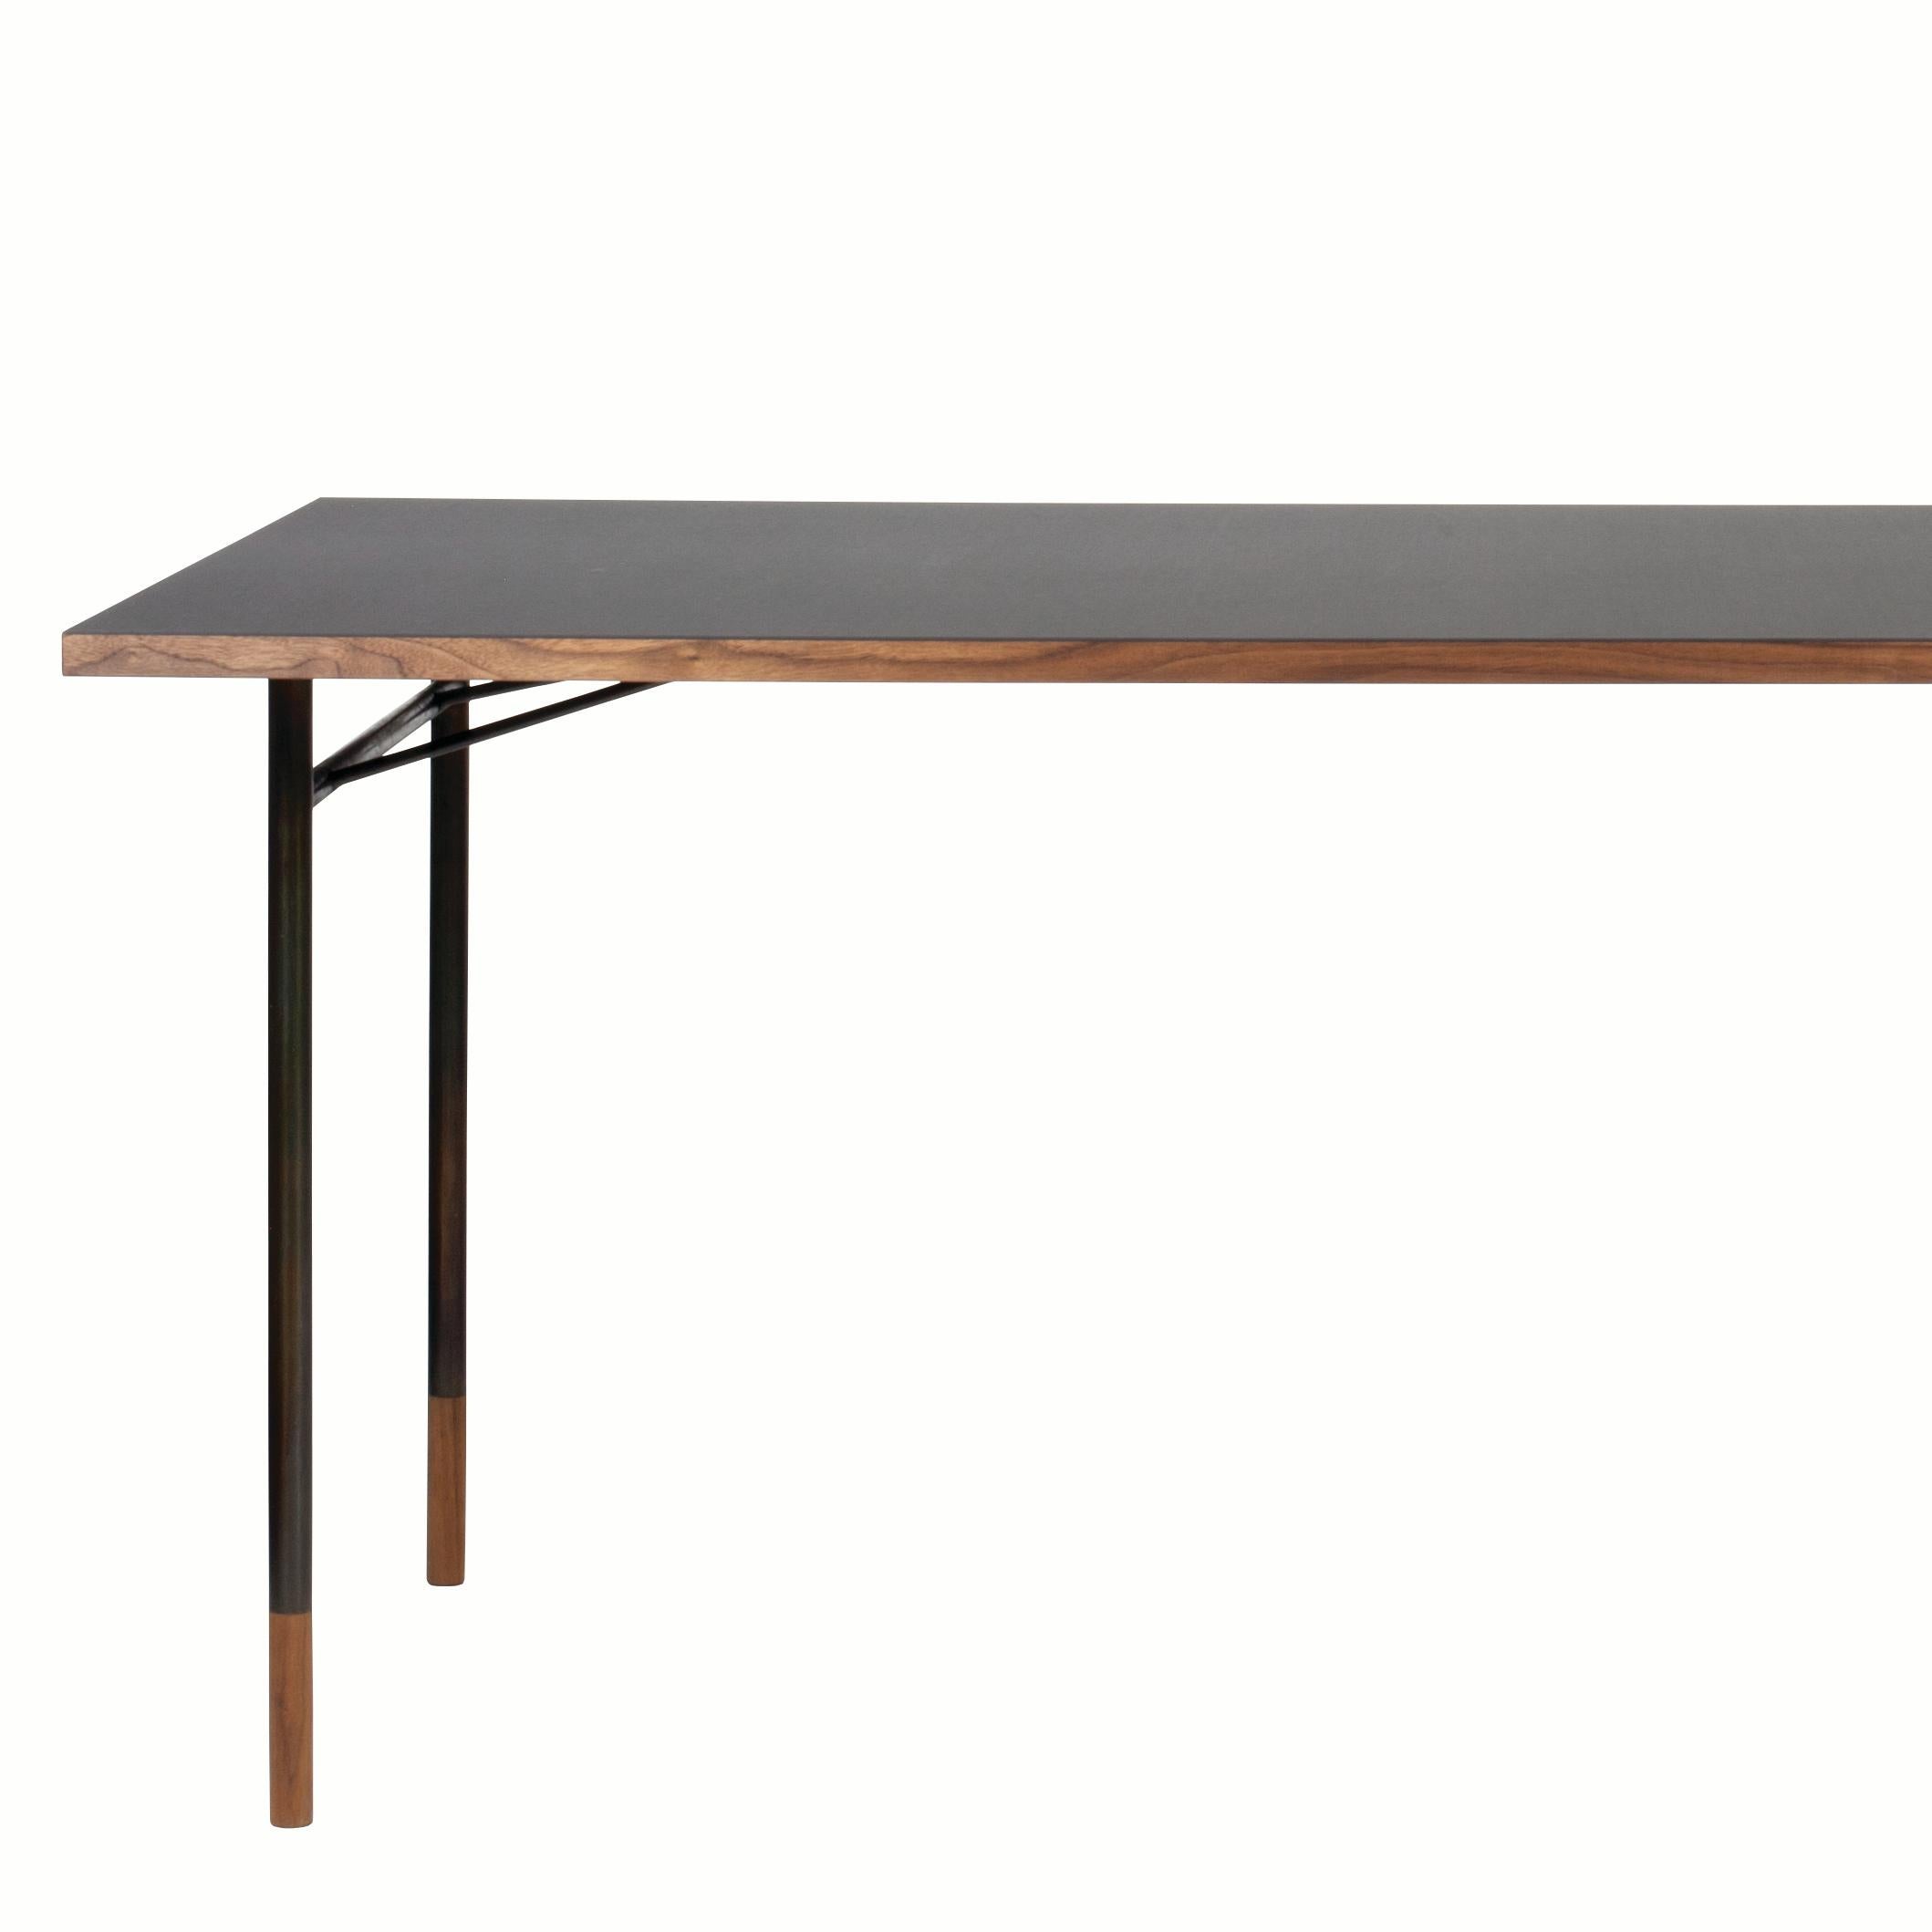 Table desk designed by Finn Juhl in 1945, relaunched in 2009. Manufactured by House of Finn Juhl in Denmark.

During his career, Finn Juhl designed a series of different tables with almost invisible legs in burnished or painted steel with wooden